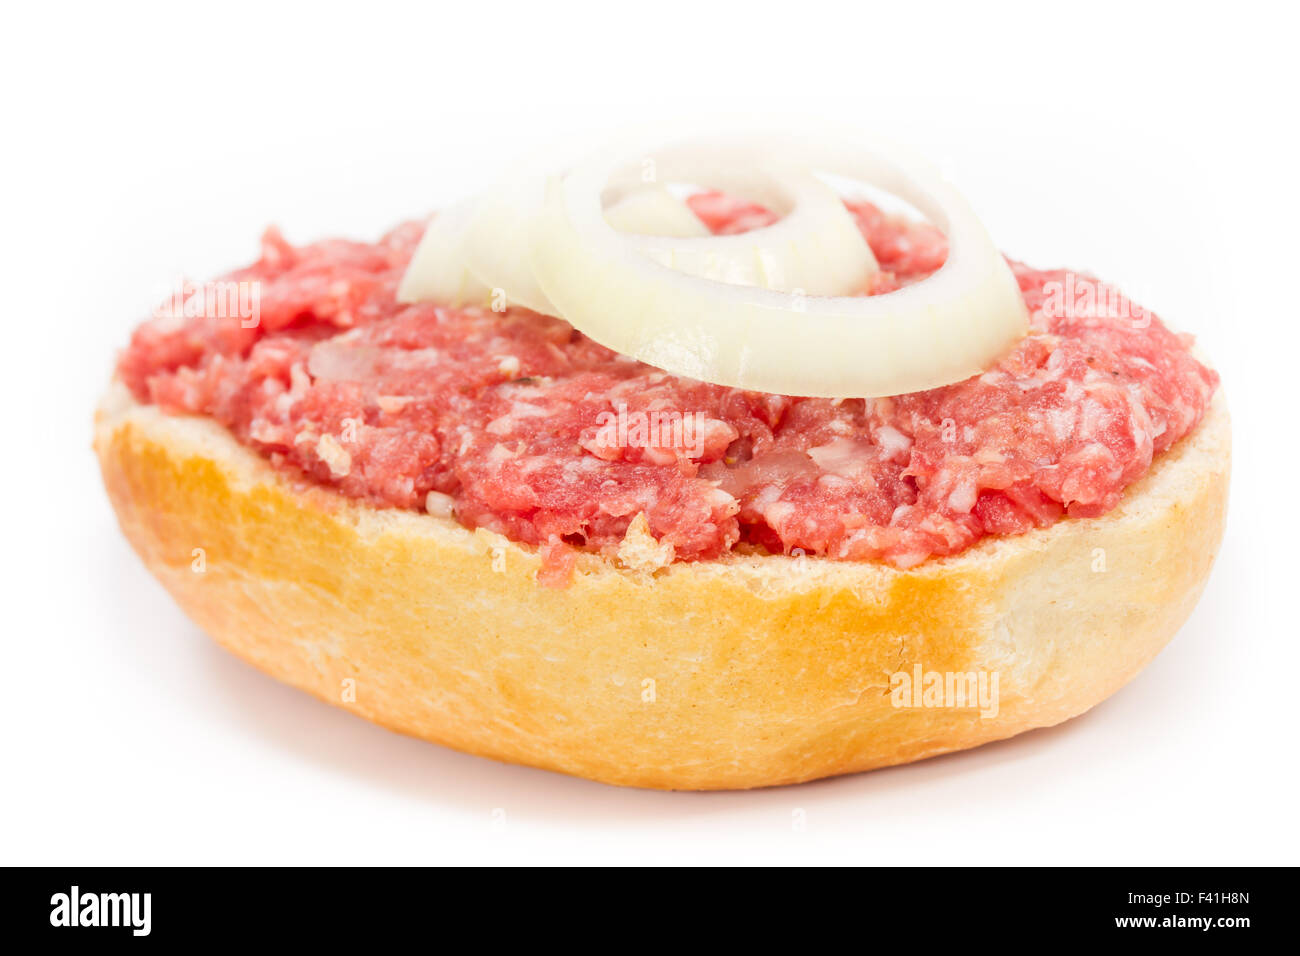 minced meat Stock Photo